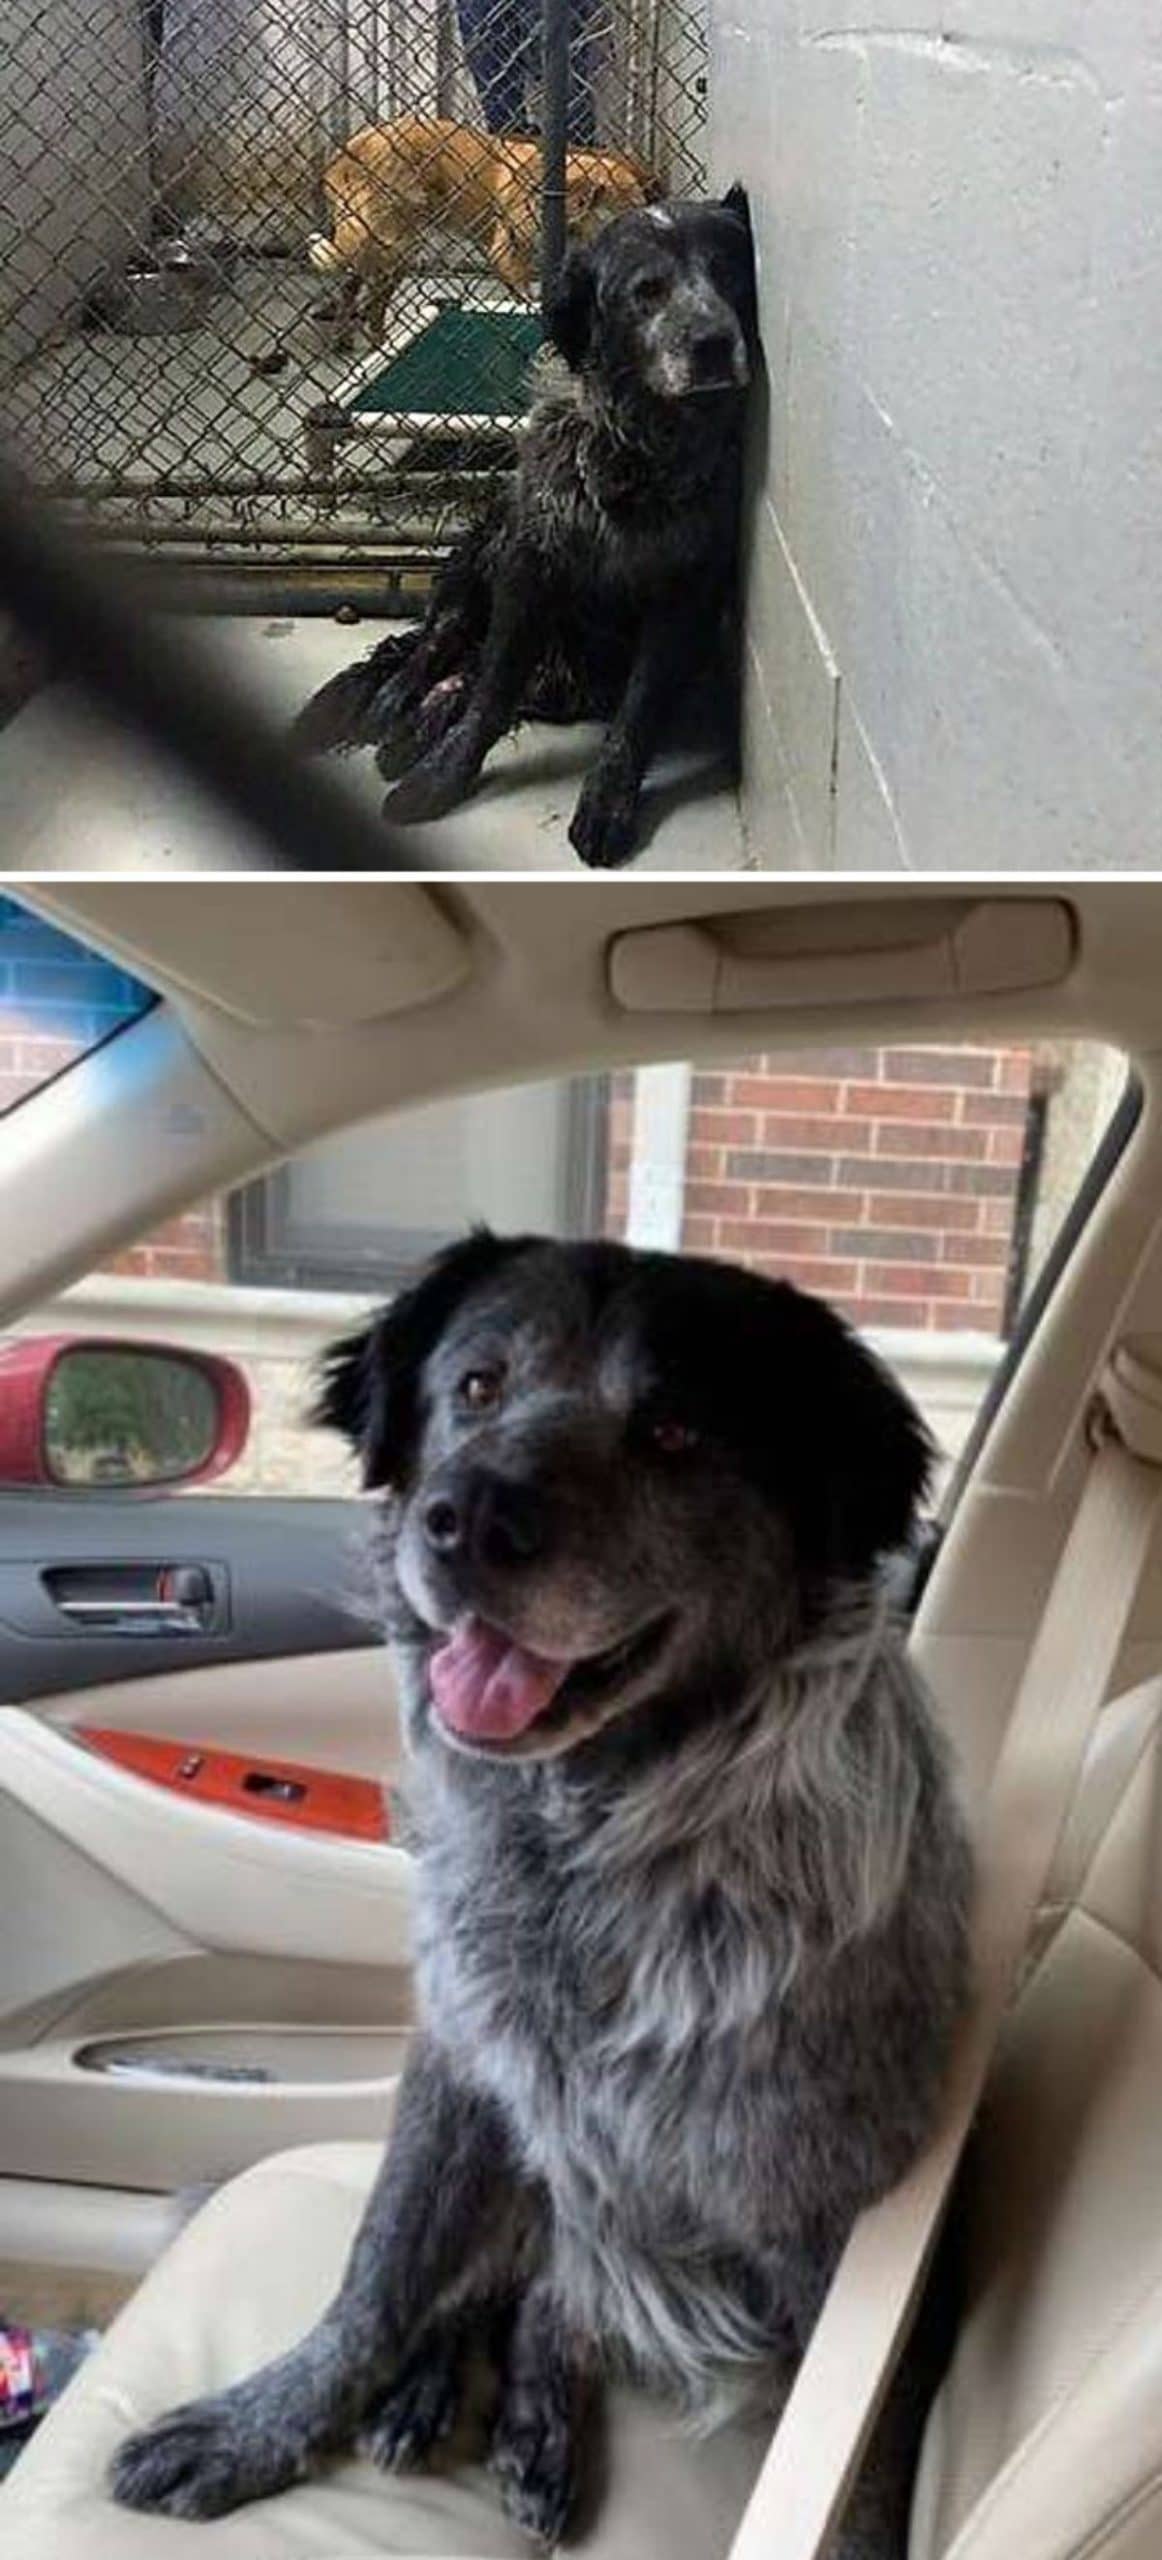 1 photo of an old black dog leaning against the wall sadly with another dog in another kennel behind and 1 photo of the old black dog smiling inside a car